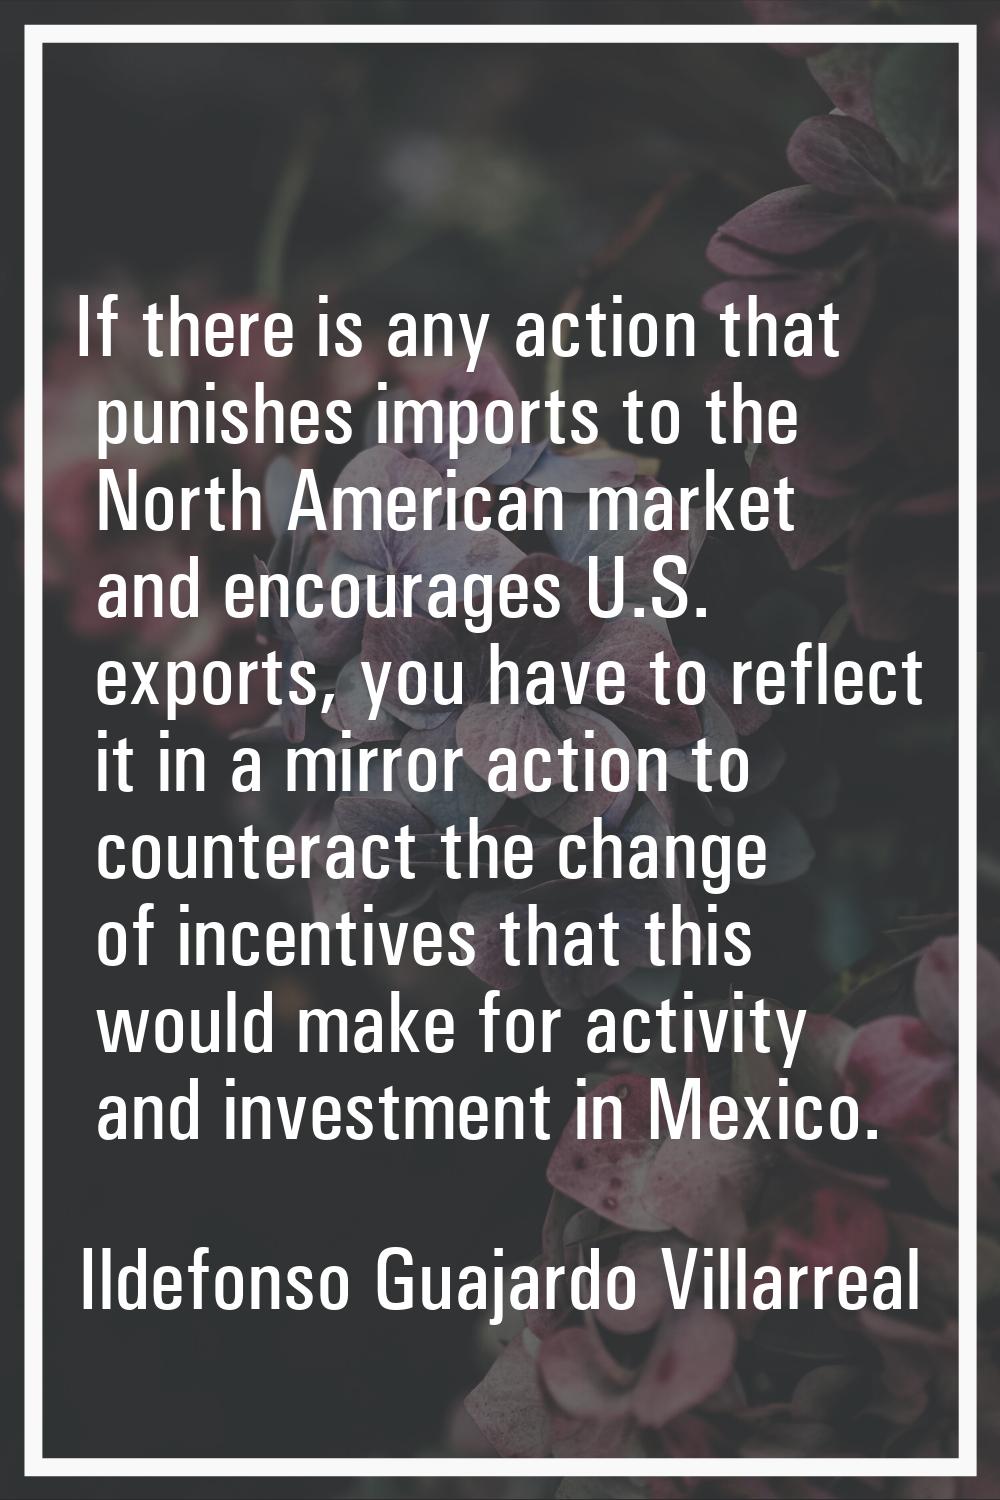 If there is any action that punishes imports to the North American market and encourages U.S. expor